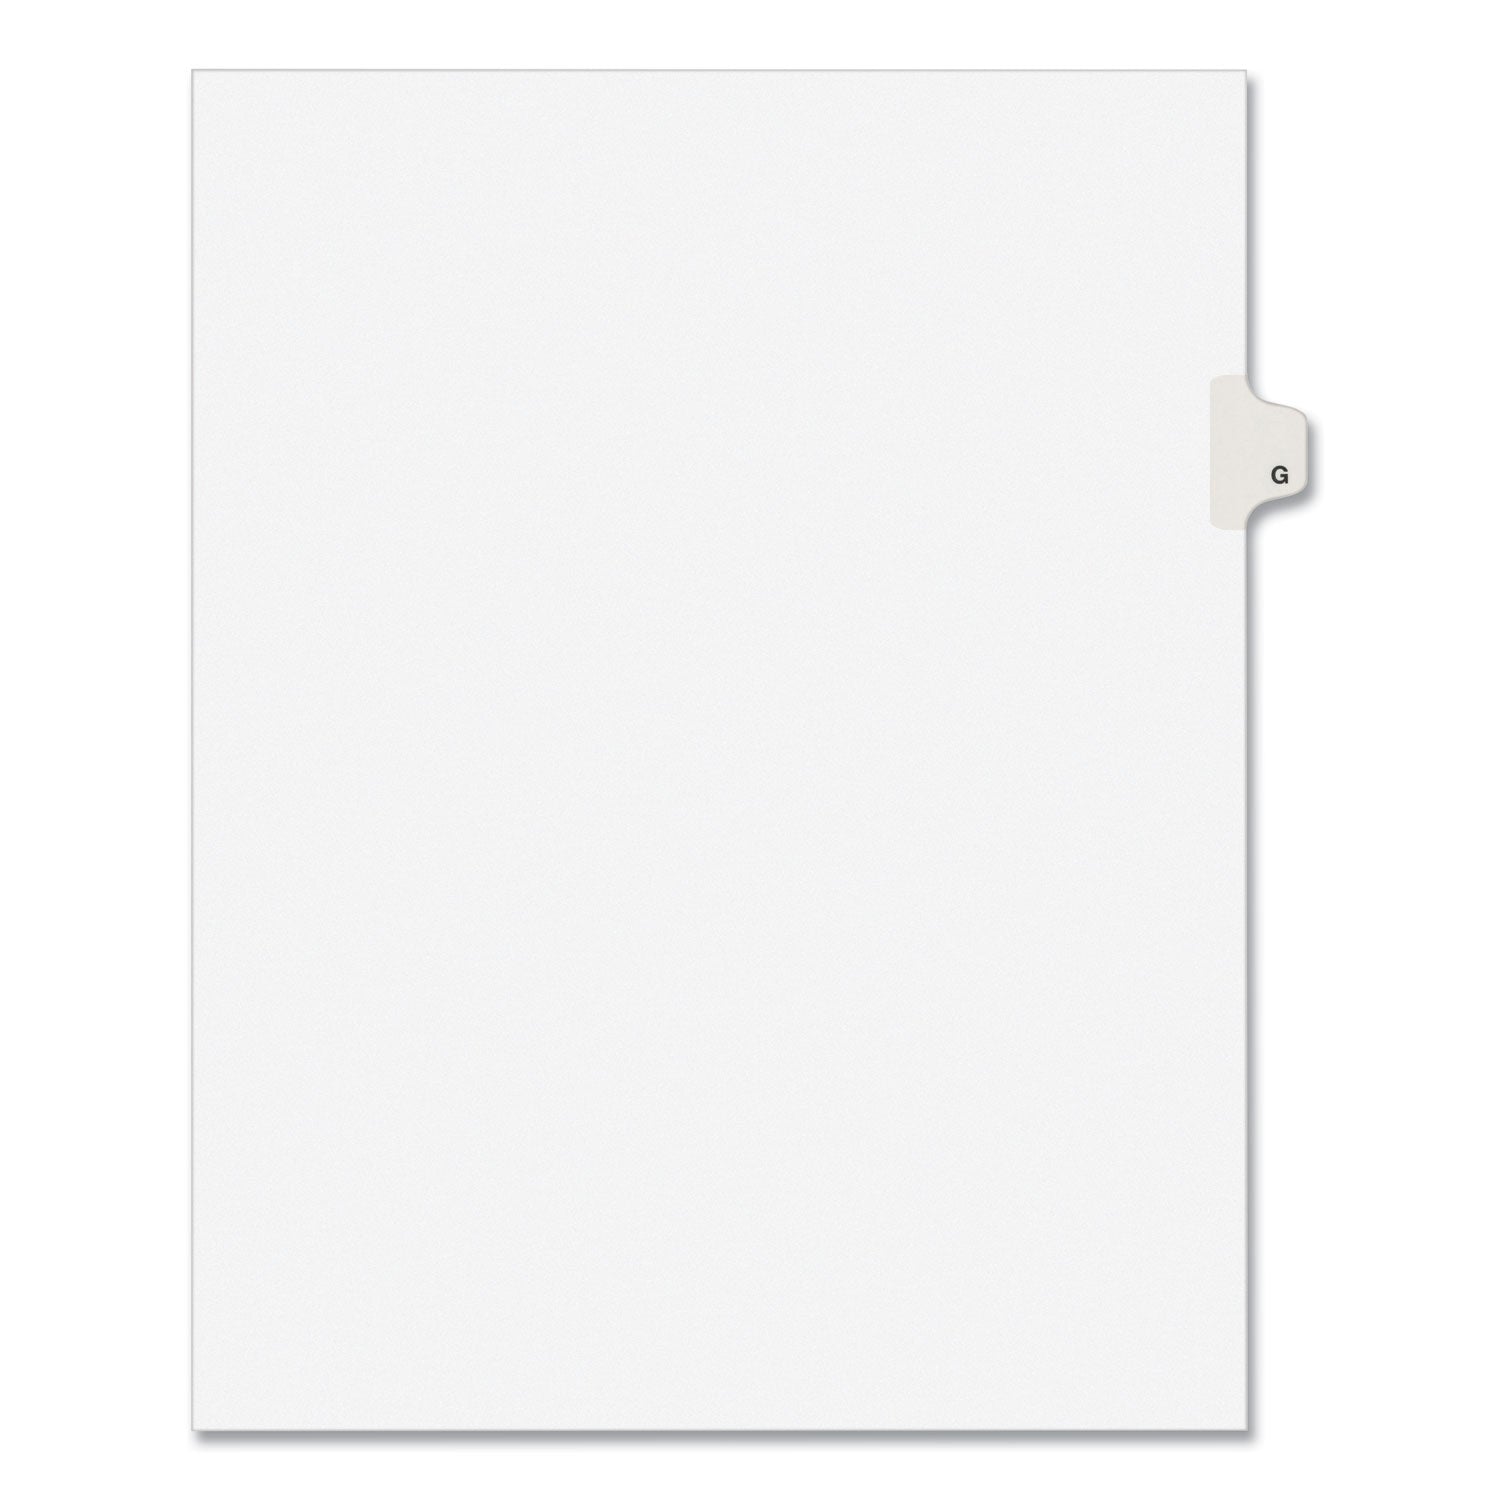 Preprinted Legal Exhibit Side Tab Index Dividers, Avery Style, 26-Tab, G, 11 x 8.5, White, 25/Set, (1407) - 